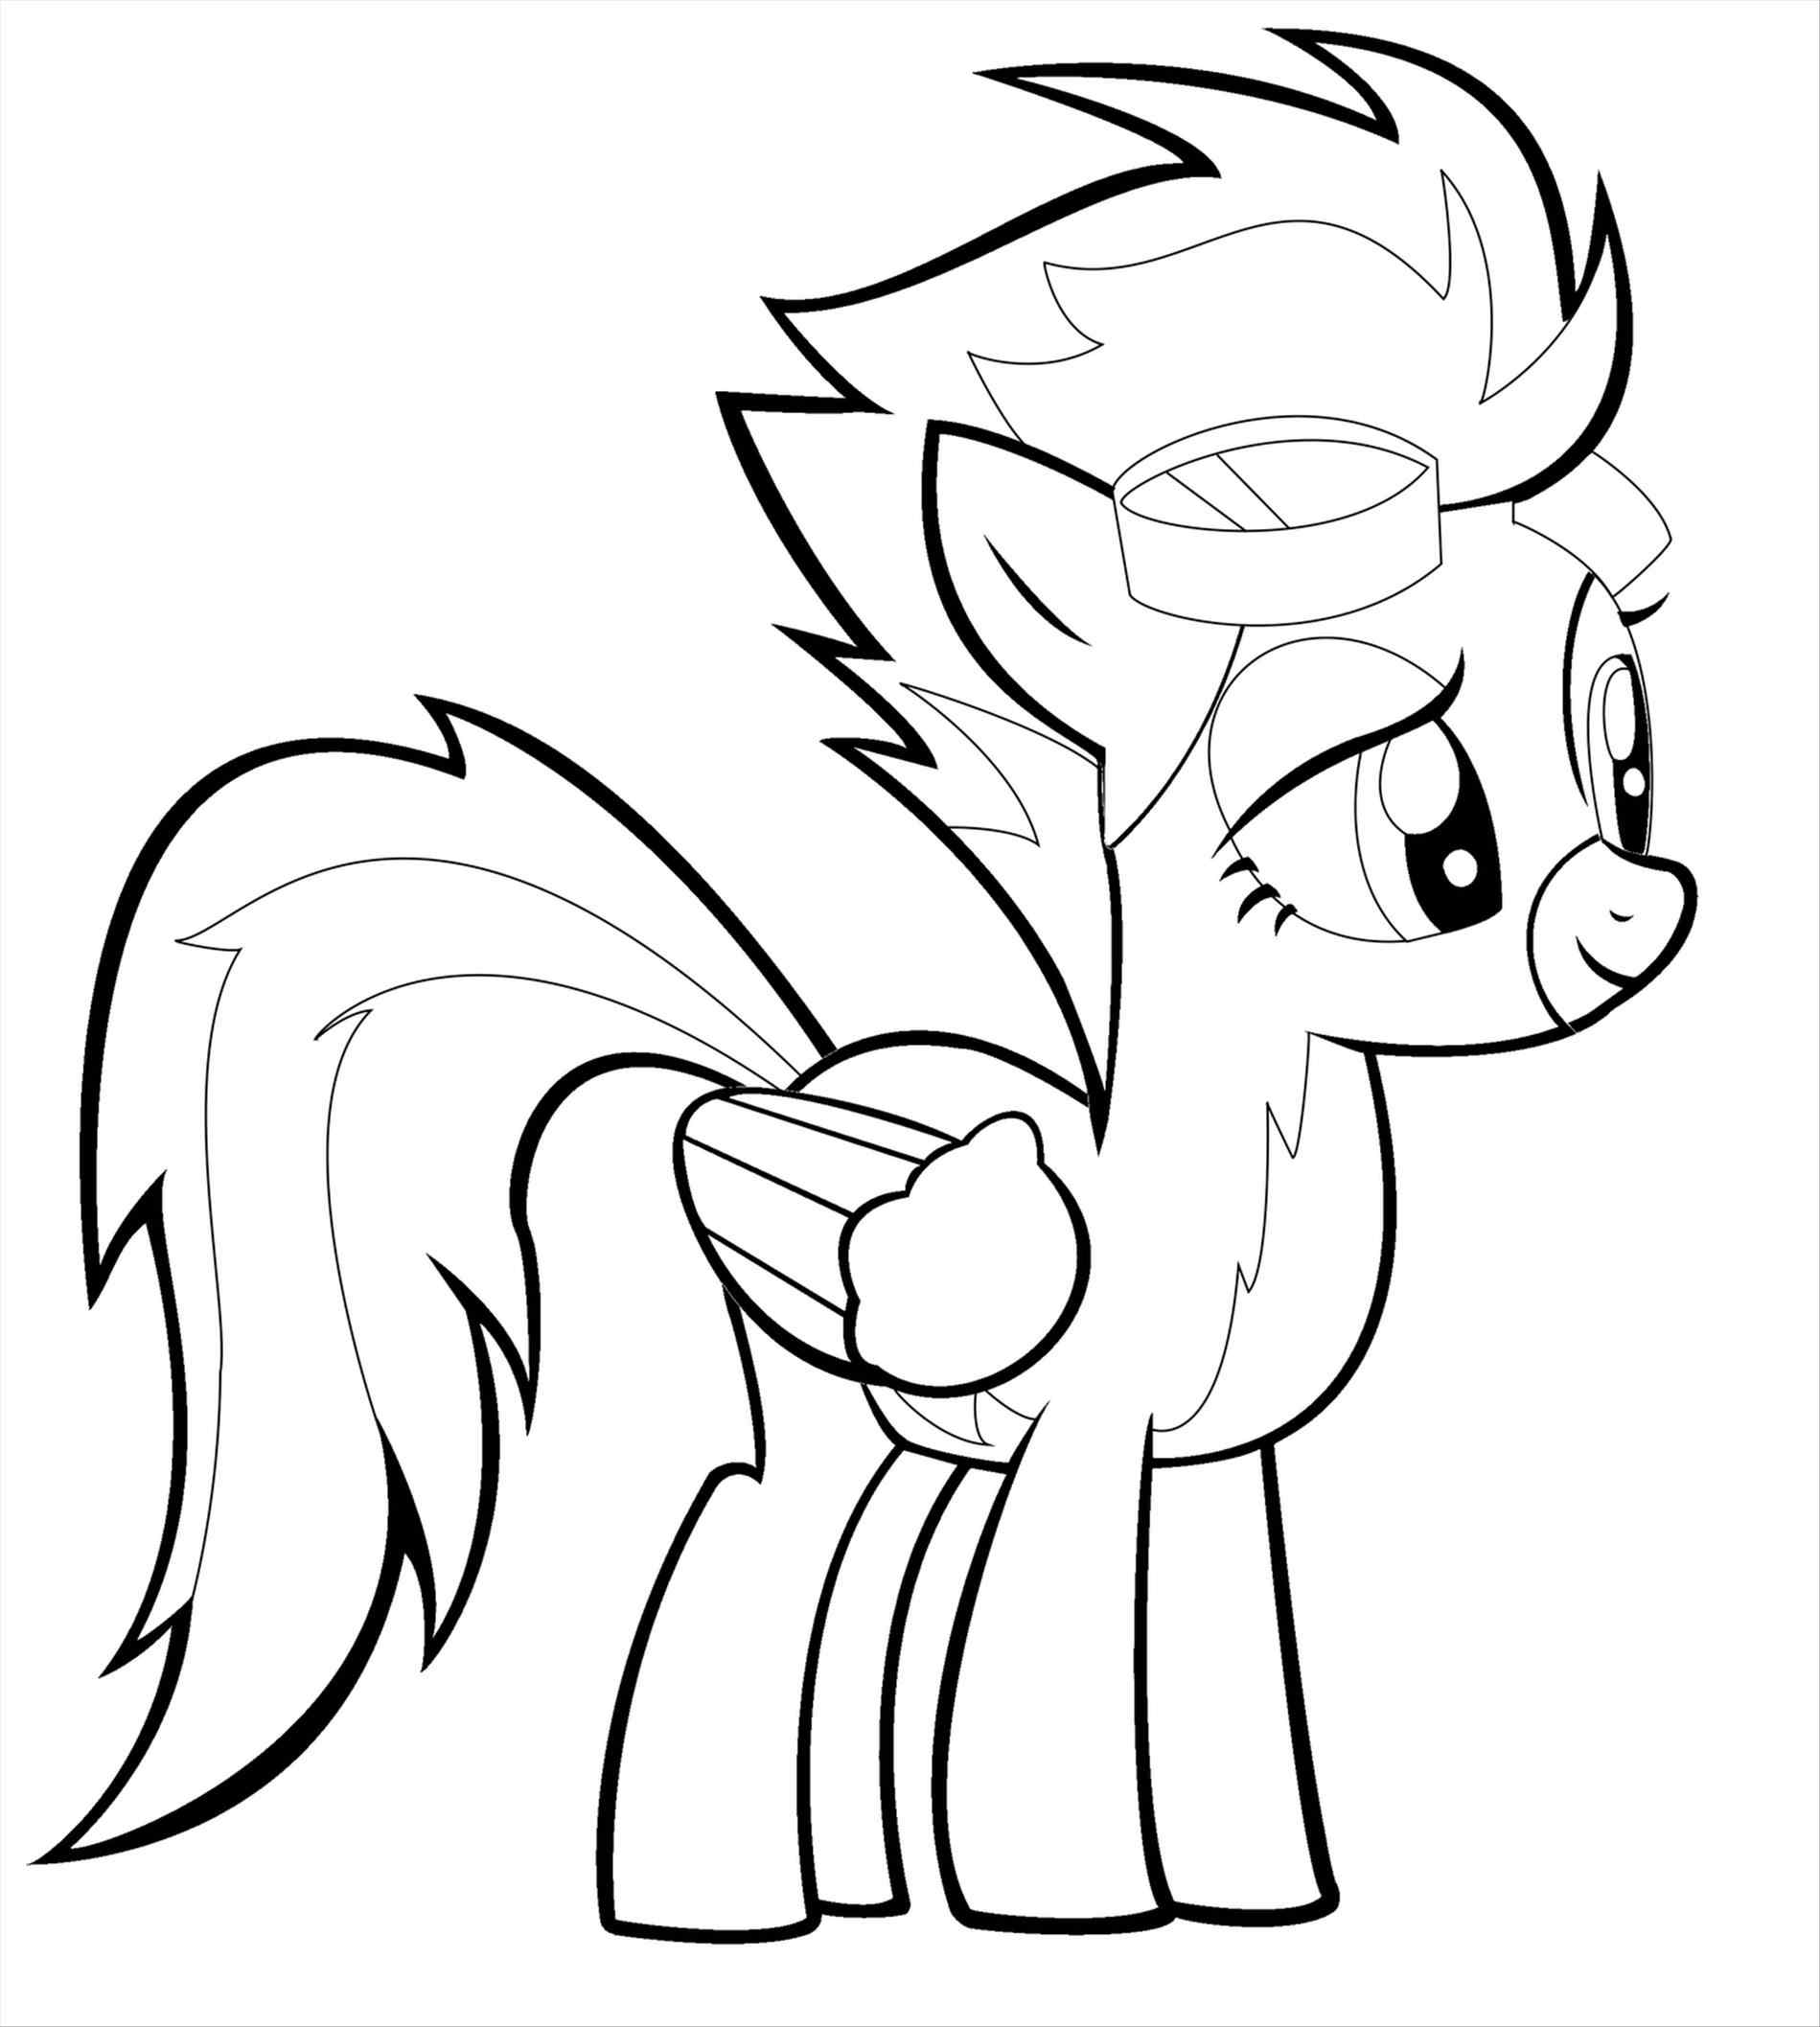 My Little Pony Cutie Mark Crusaders Coloring Pages at ...